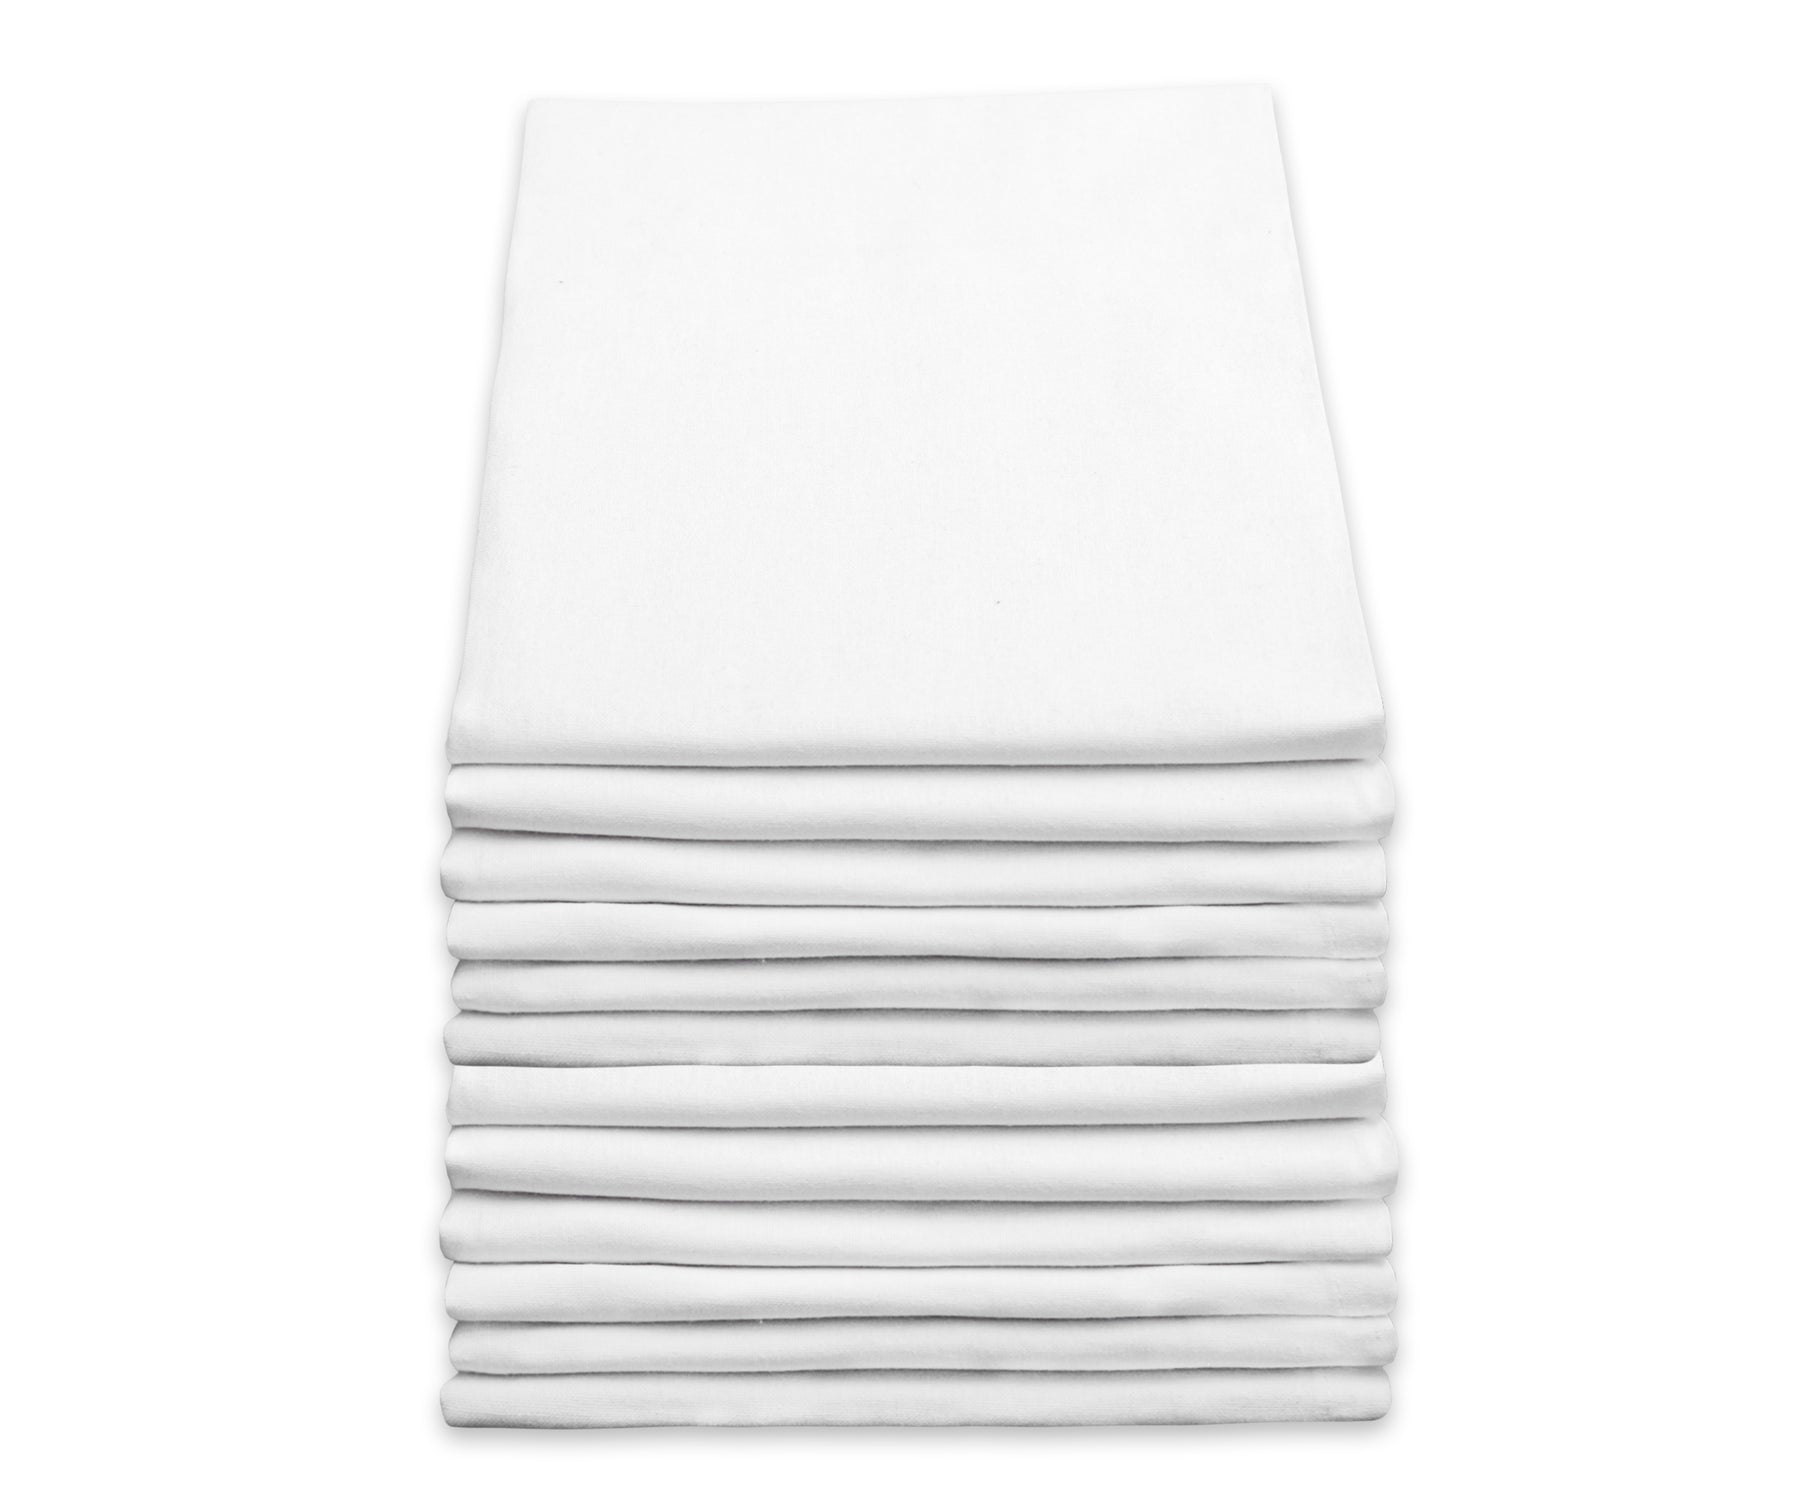 white cloth kitchen towels, flour sack towels or flour sack tea towels are most absorbent. flour sack towels is suitable for easter dish towels.